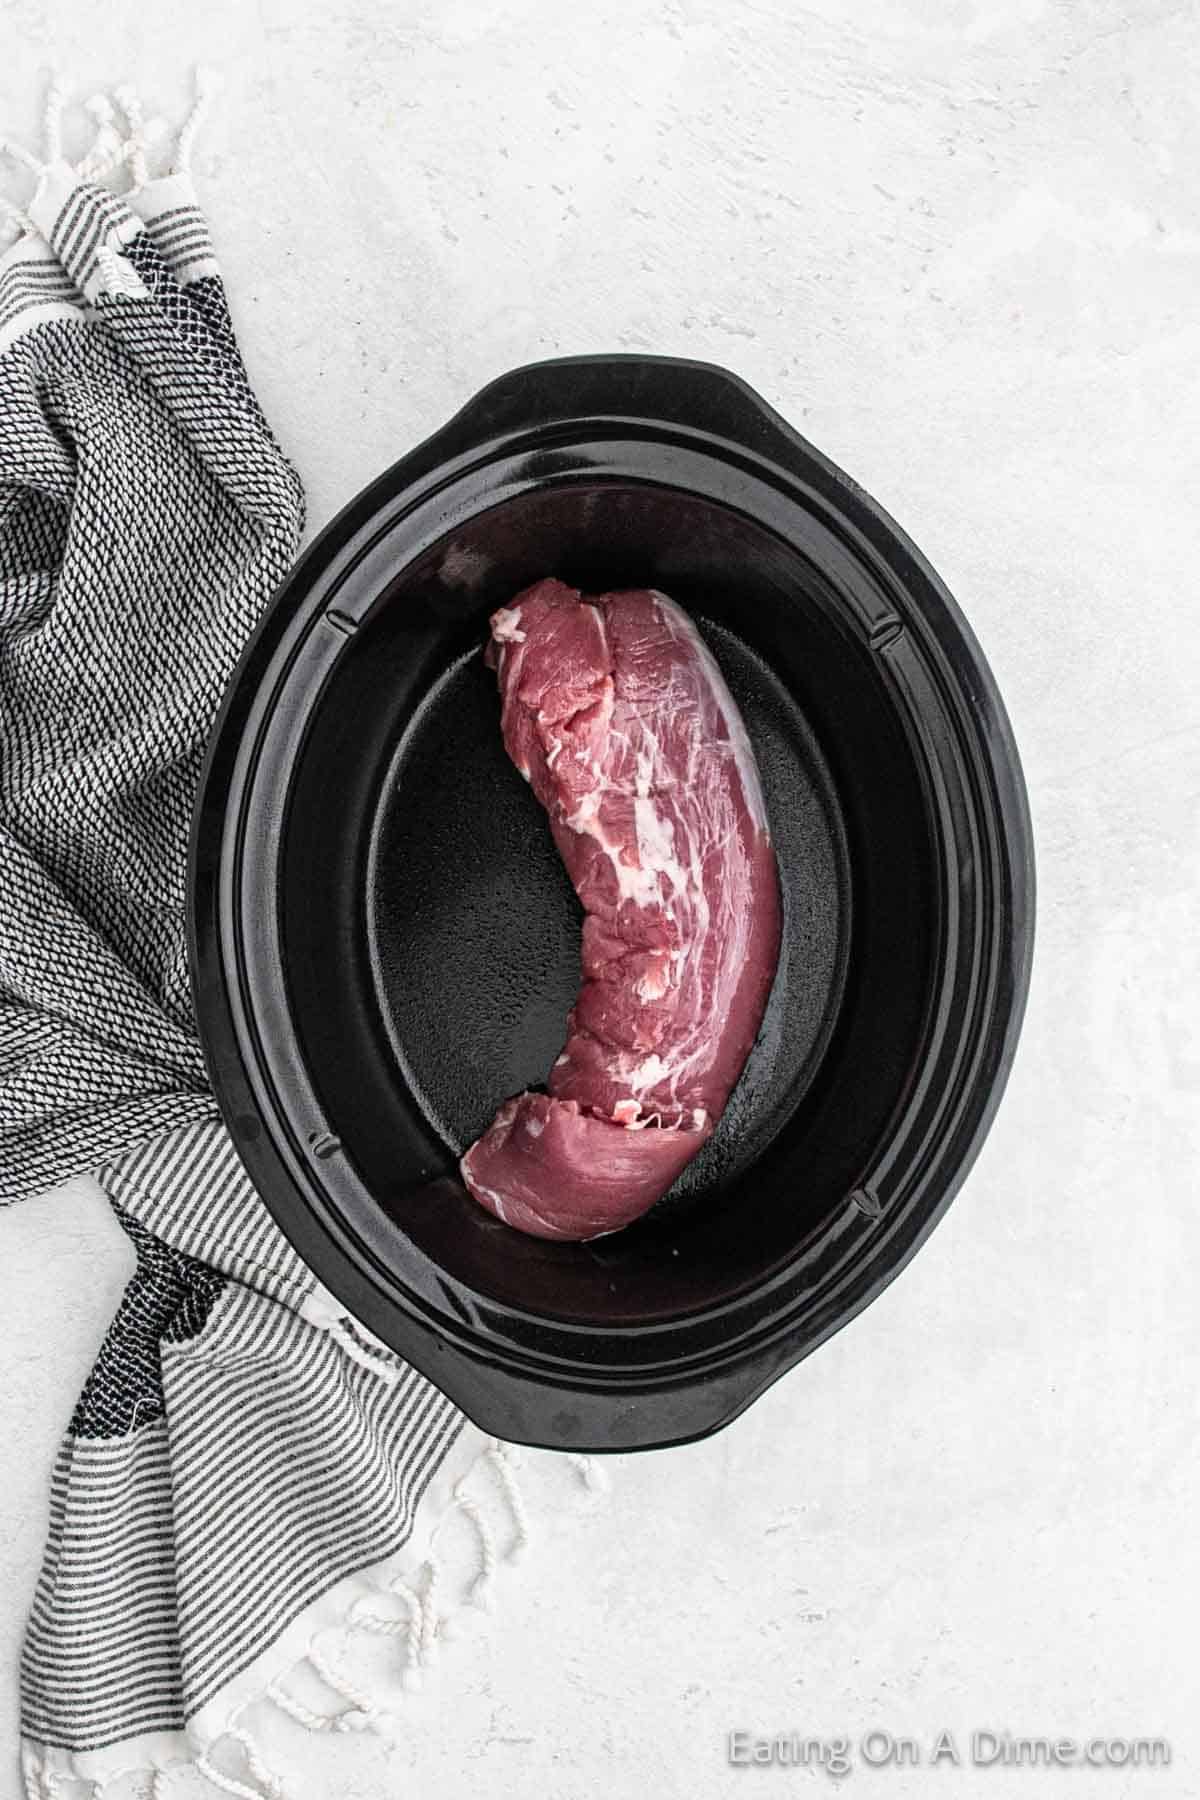 A raw pork tenderloin sits in a black slow cooker on a light gray surface, ready for the delicious Crock Pot Cuban Mojo Pork Tenderloin recipe. A white and dark gray striped kitchen towel is draped to the left of the slow cooker. The text "Eating On A Dime.com" is visible in the bottom right corner.